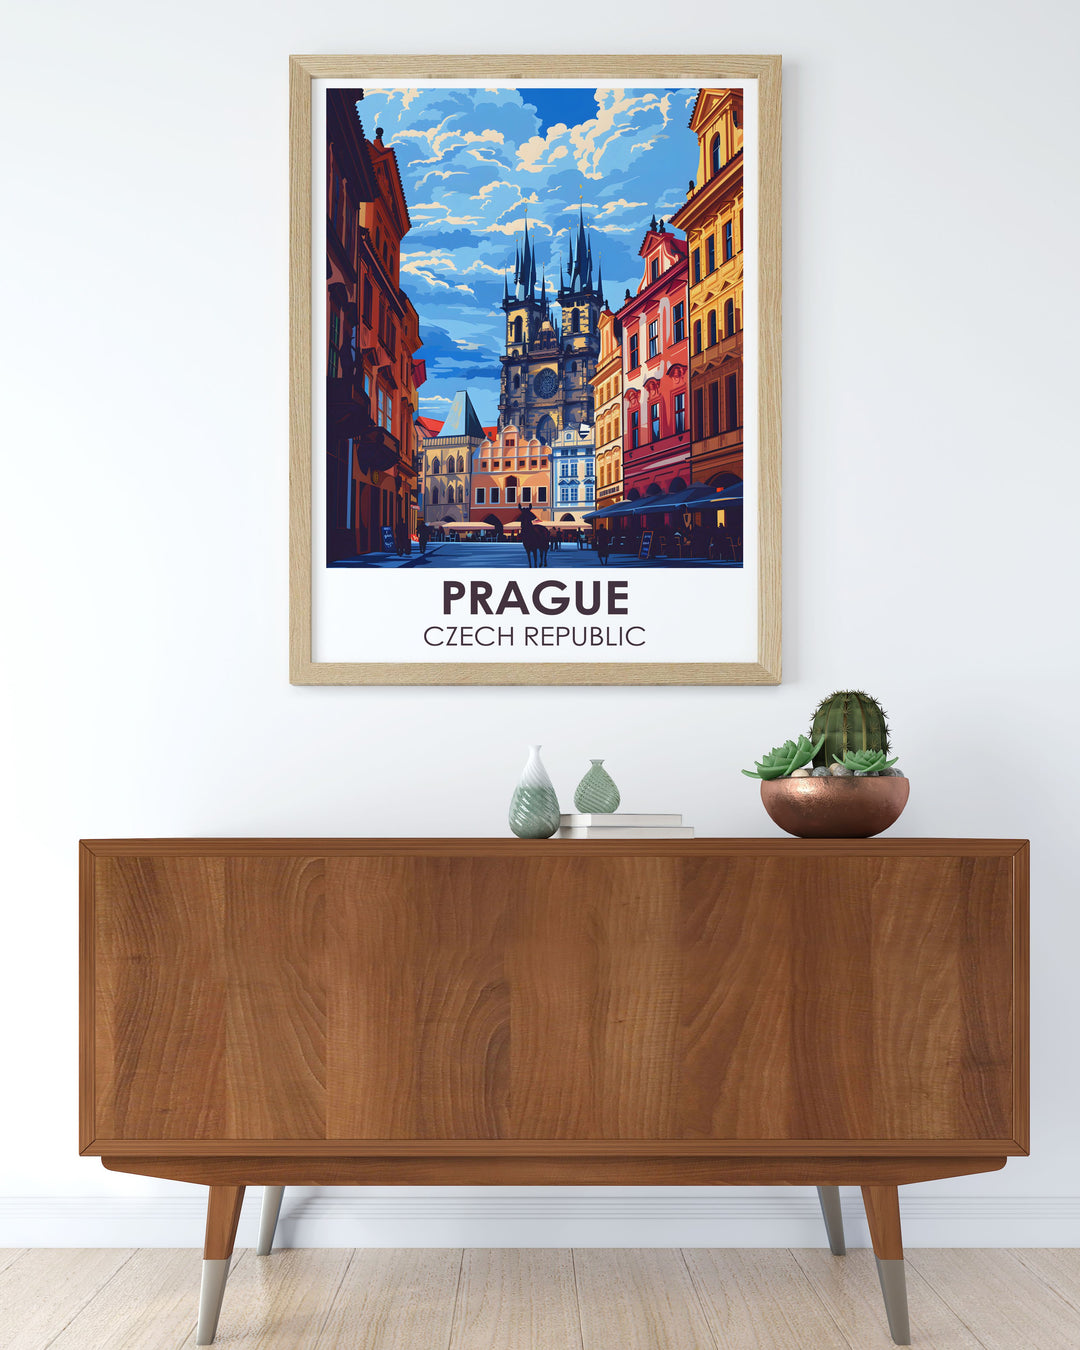 Add a touch of elegance to your home with an Old Town Square poster. This Prague Art Print highlights the beauty of the citys historic center, making it a perfect piece for any Prague Wall Decor. Great for travel and art lovers alike.